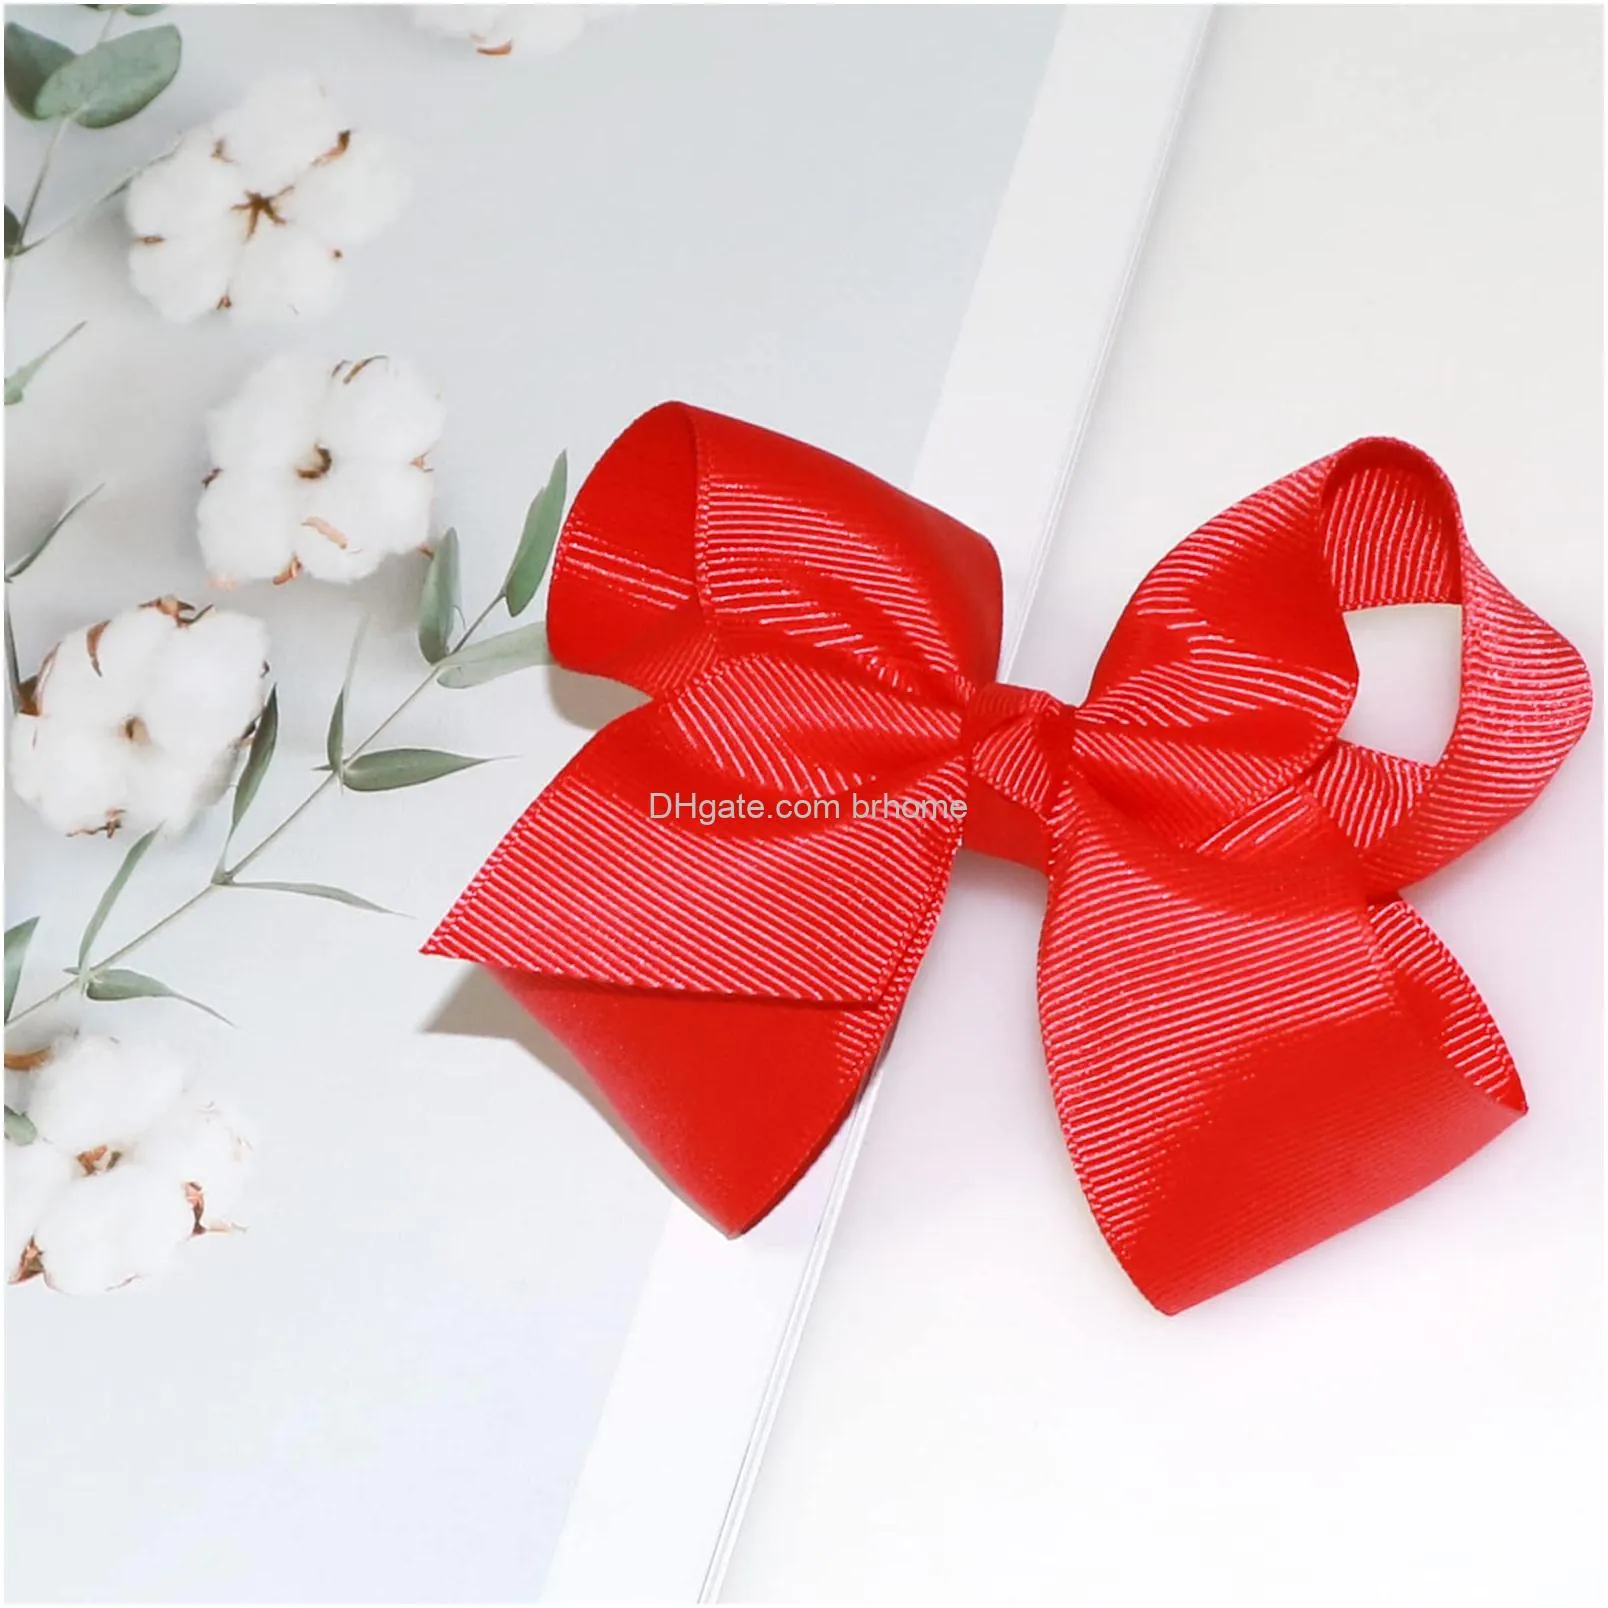 4.5 hair bows for girls grosgrain ribbon big hair bows alligator clips hair accessories for baby girls infants toddlers teens kids children